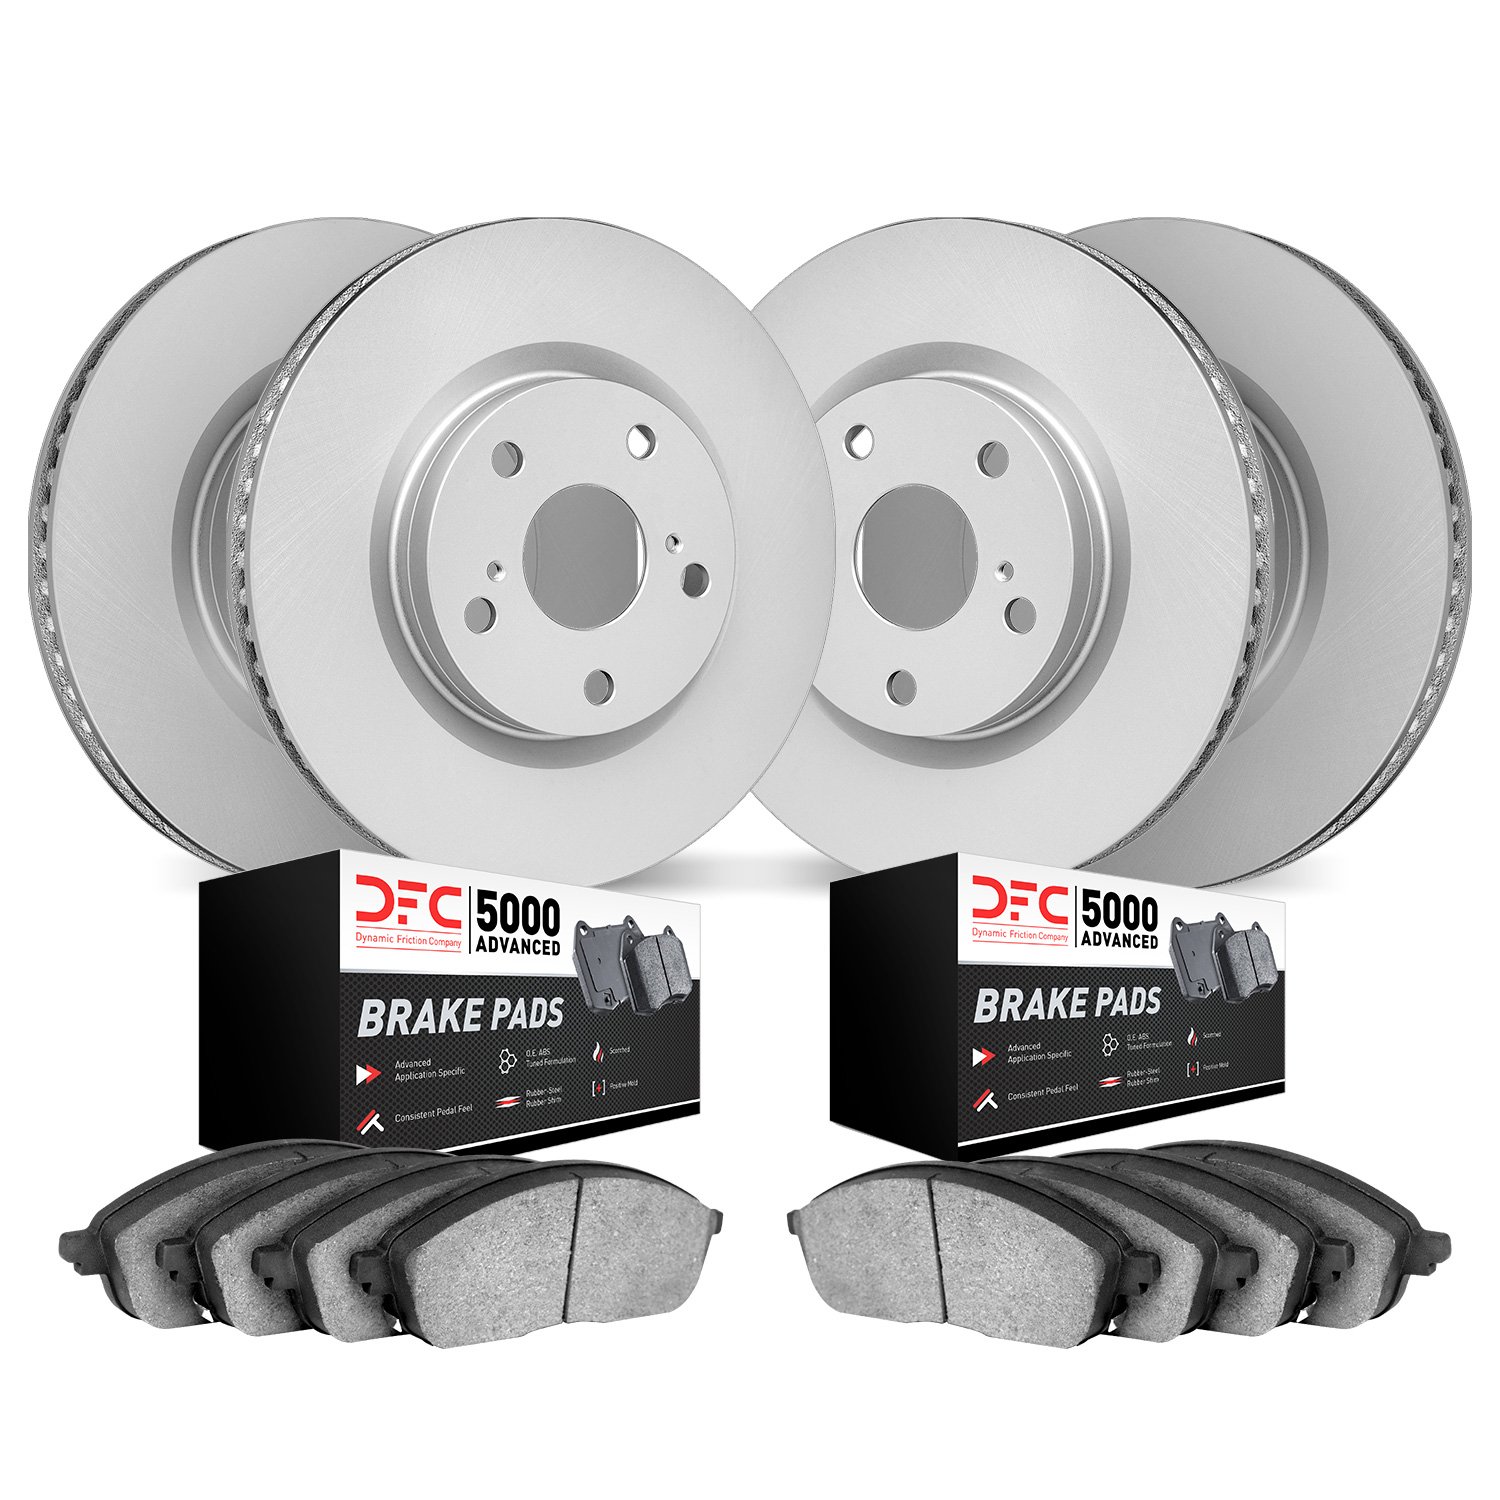 4504-67045 Geospec Brake Rotors w/5000 Advanced Brake Pads Kit, Fits Select Multiple Makes/Models, Position: Front and Rear